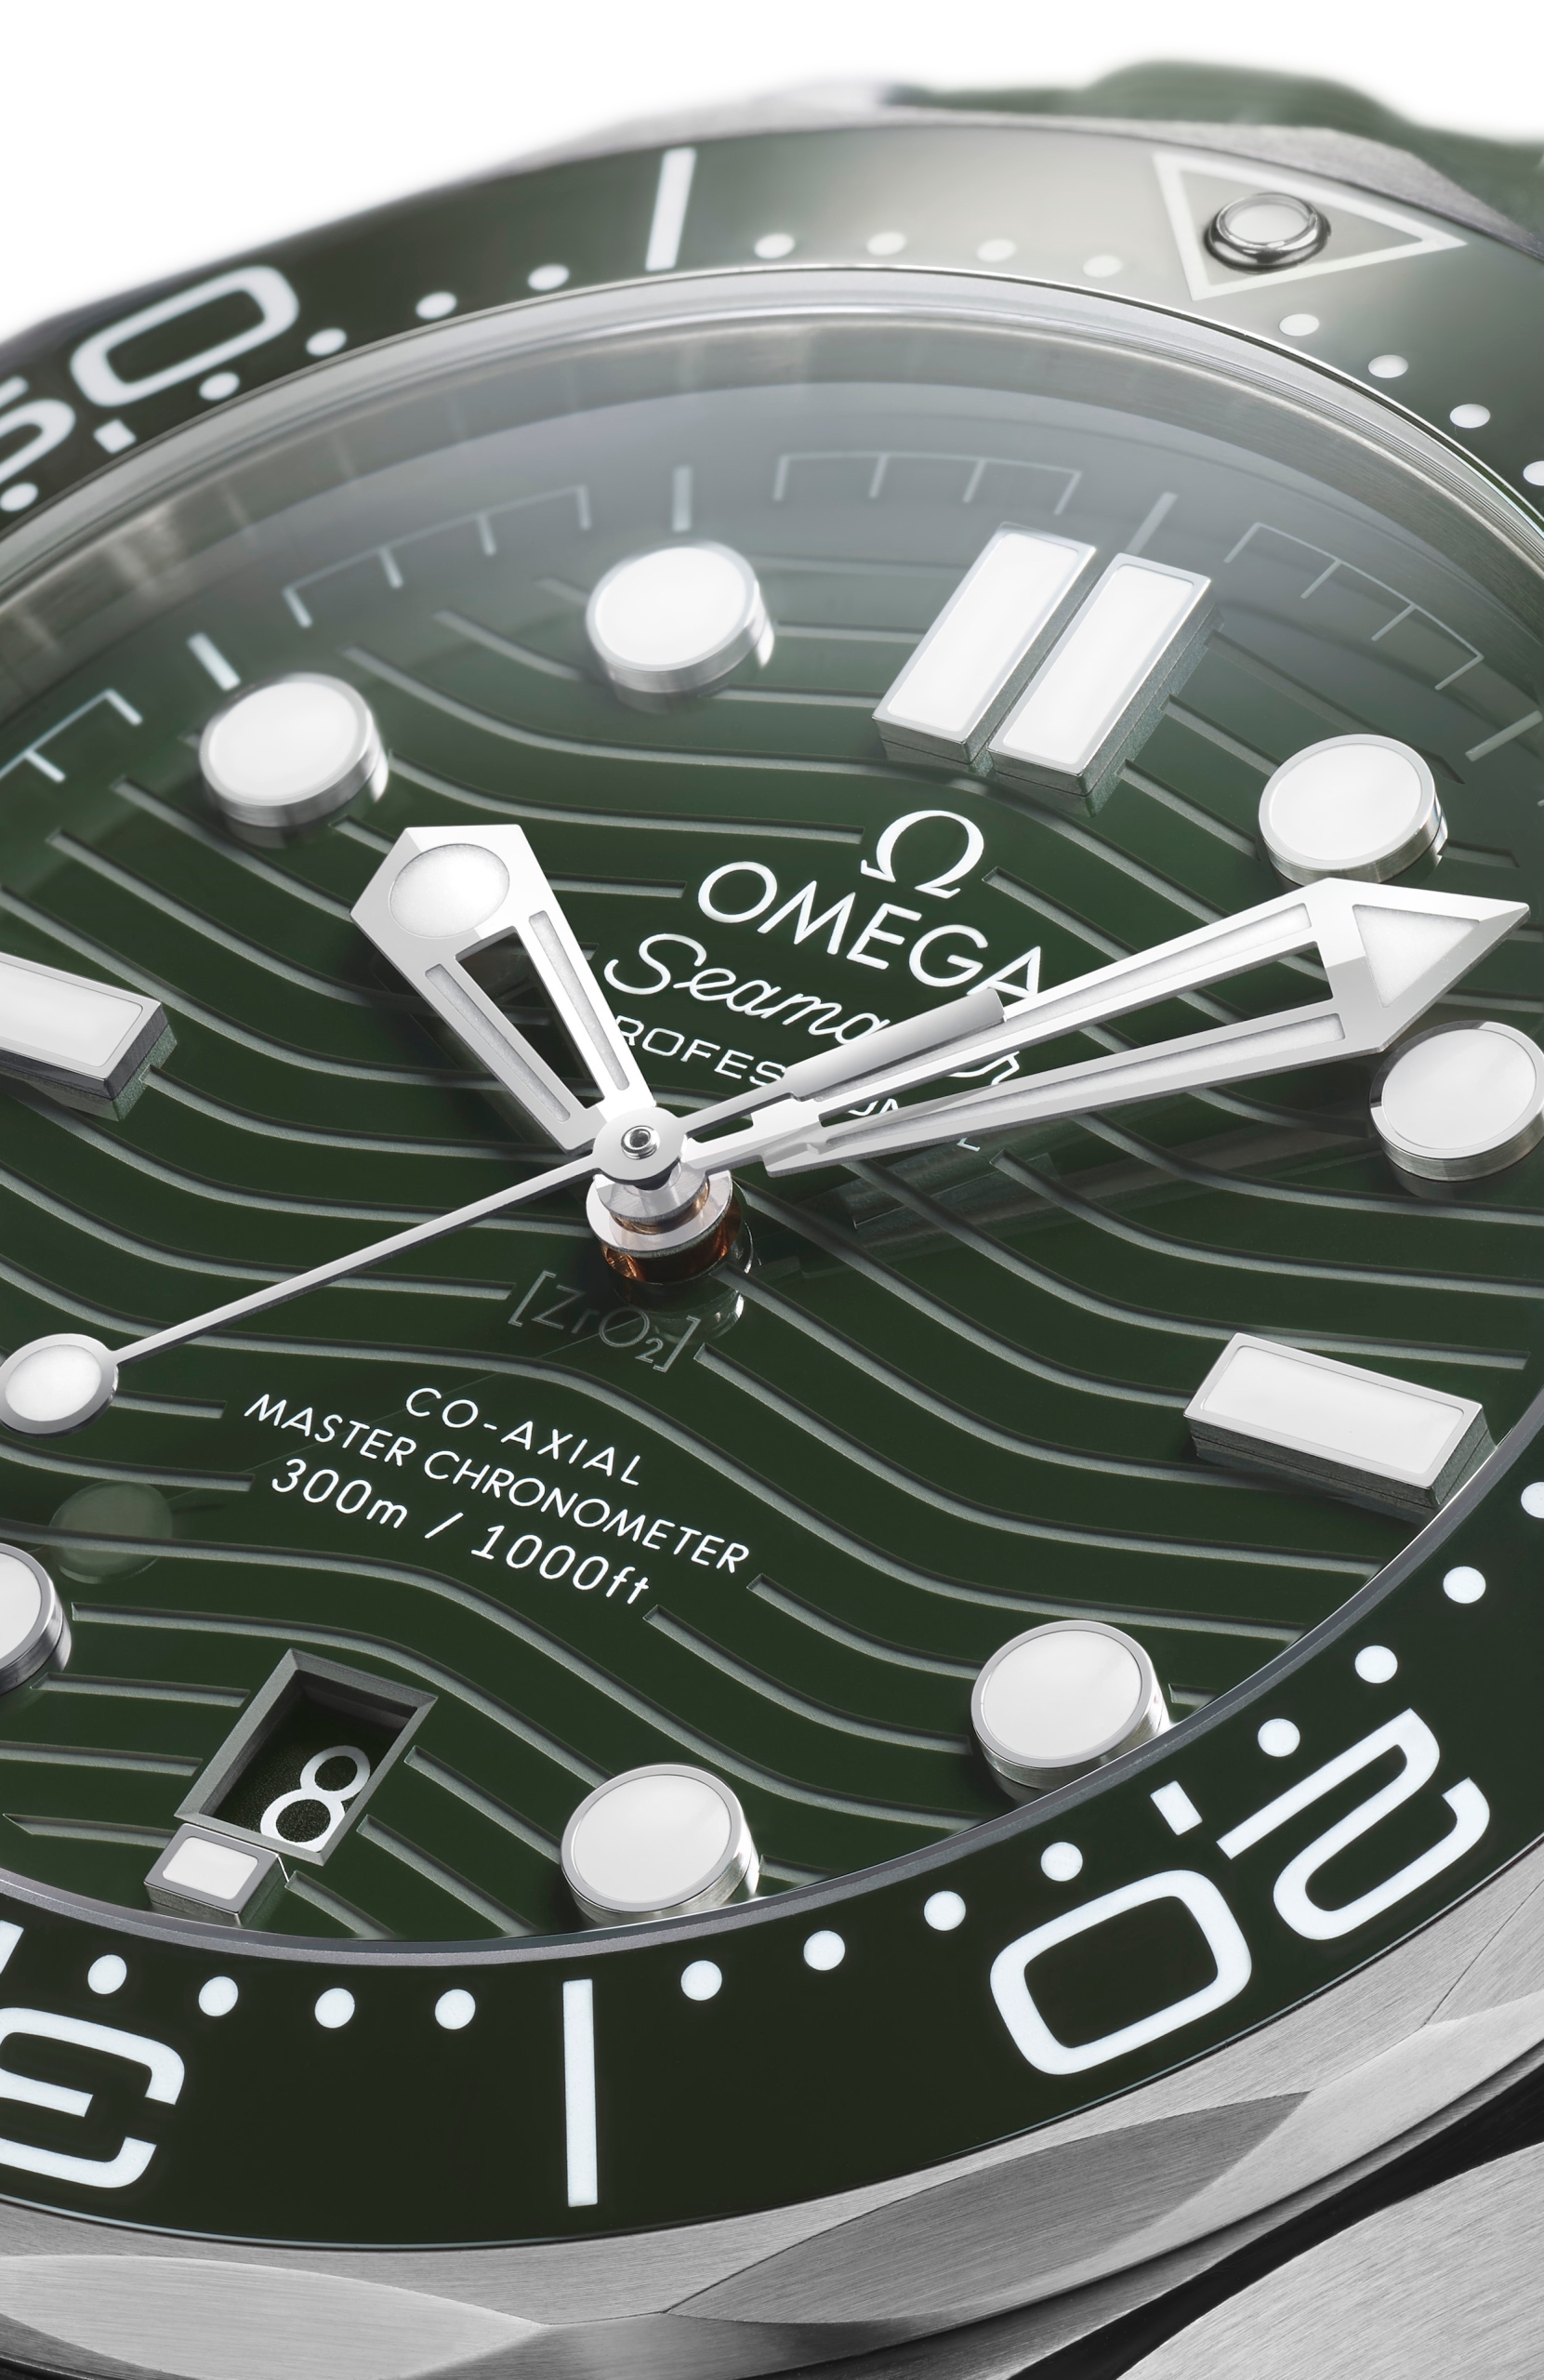 Omega Seamaster 300M Green dial close-up Ref. 210.30.42.20.10.001